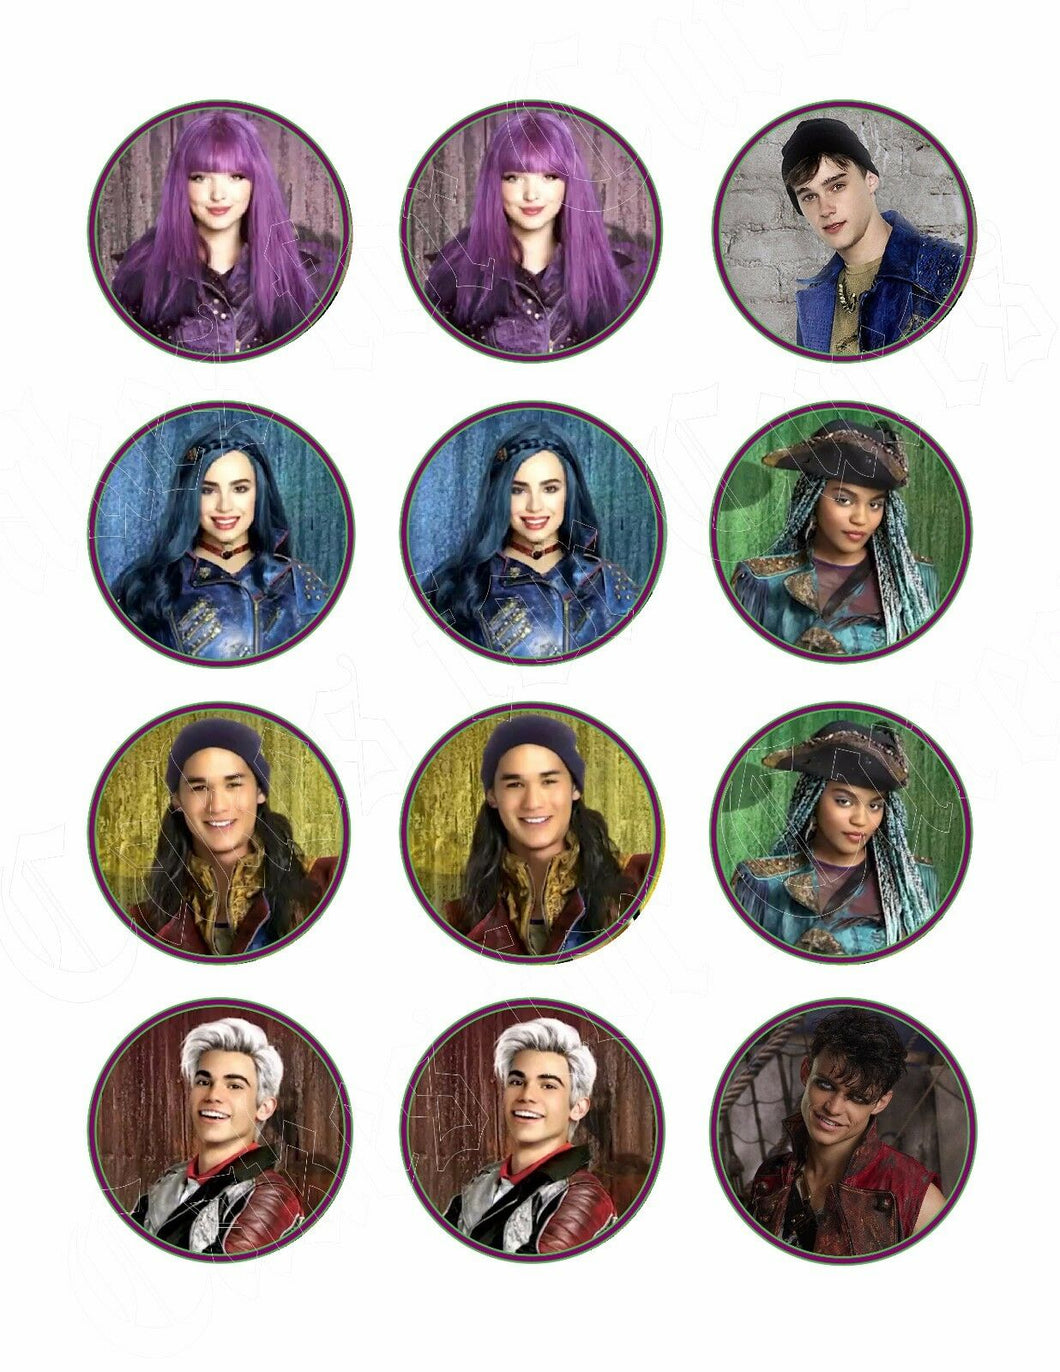 Disney Descendants 2 Edible Cupcake Images - Cupcake Toppers - Cakes For Cures